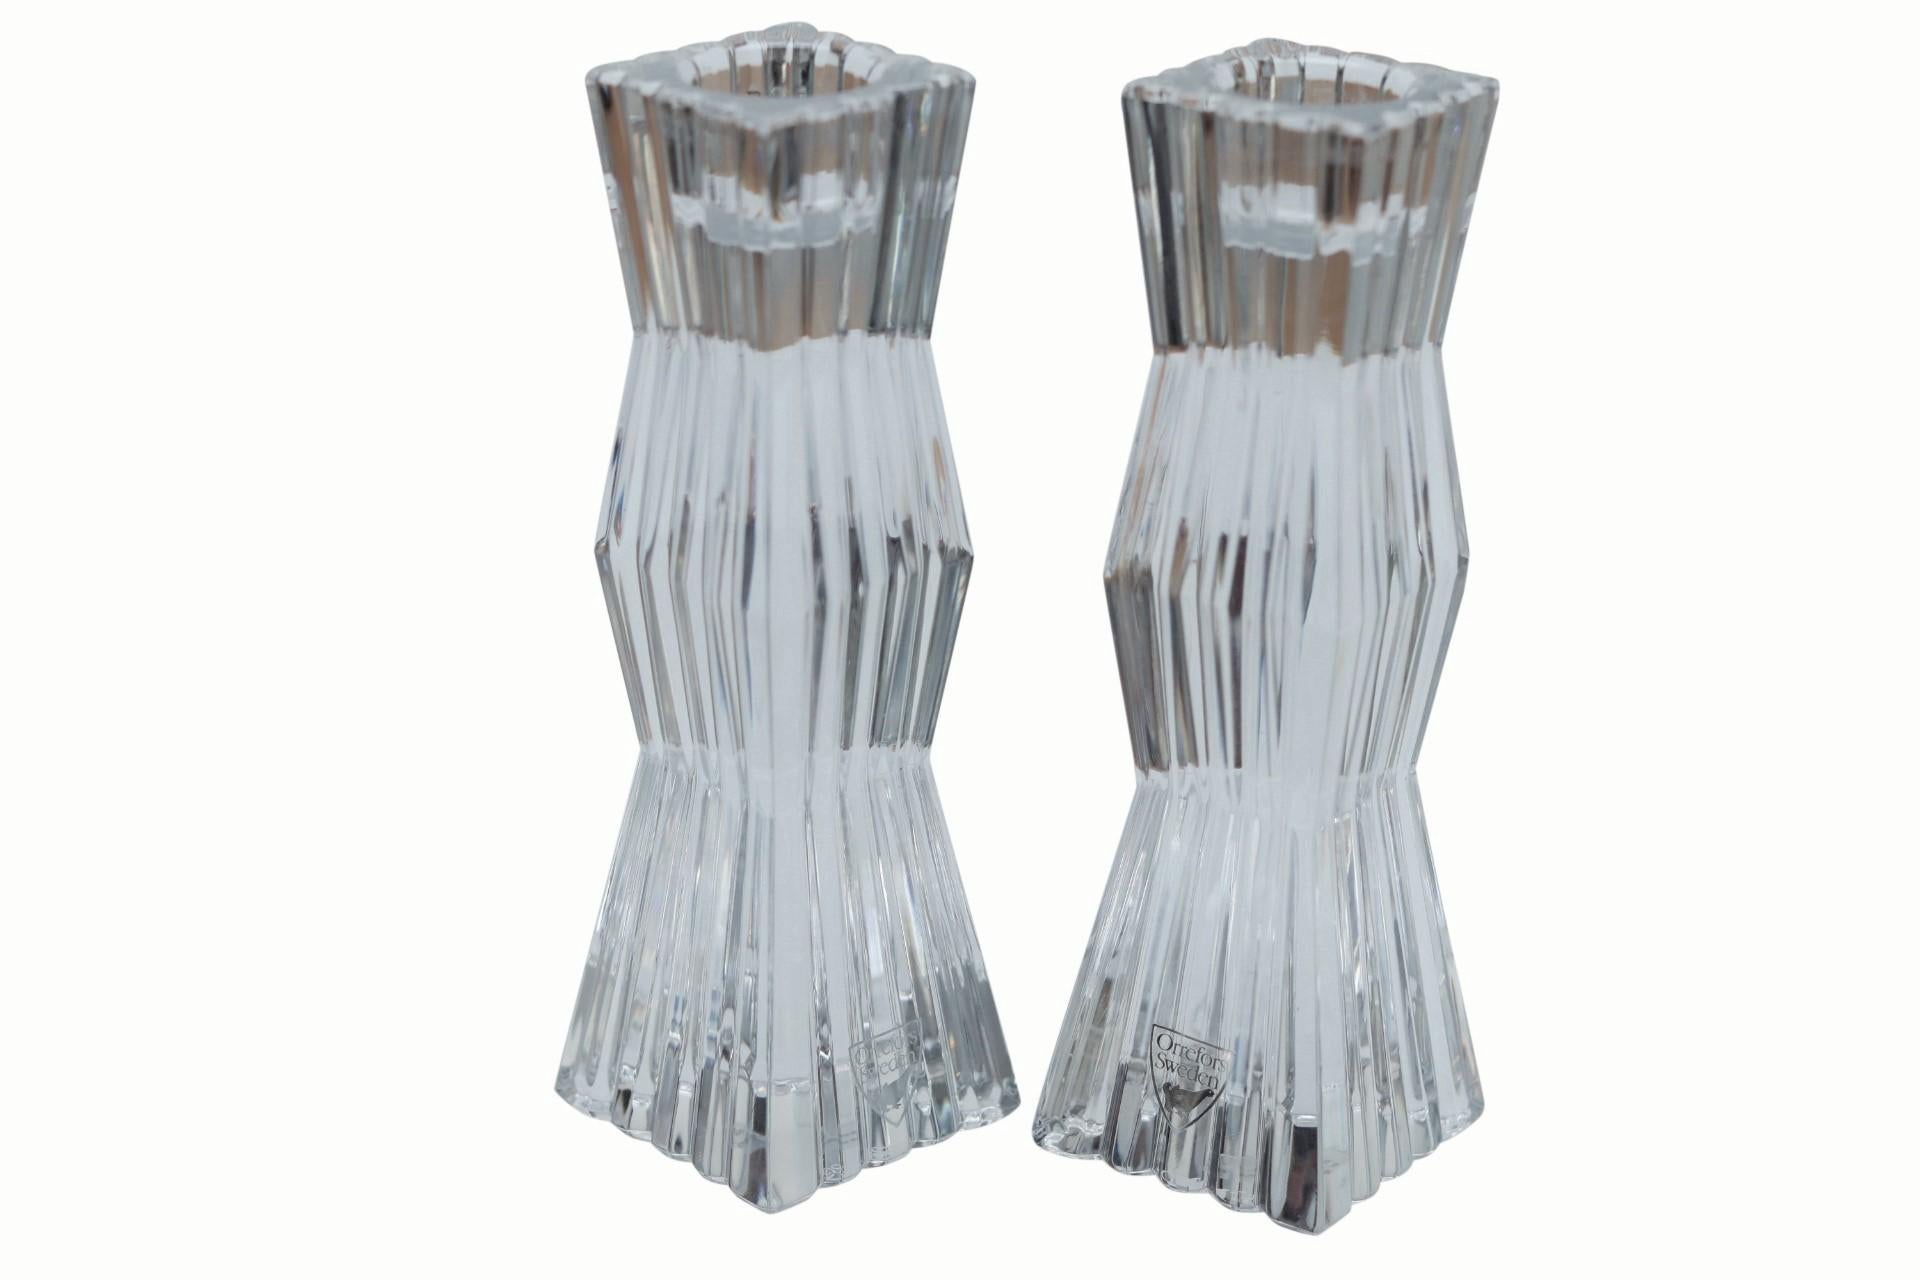 A pair of crystal candlestick holders made by Orrefors of Norway. Angular squared columns are reeded with scalloped tops and marked underneath ‘Made in Austria’. Dimensions per candlestick.